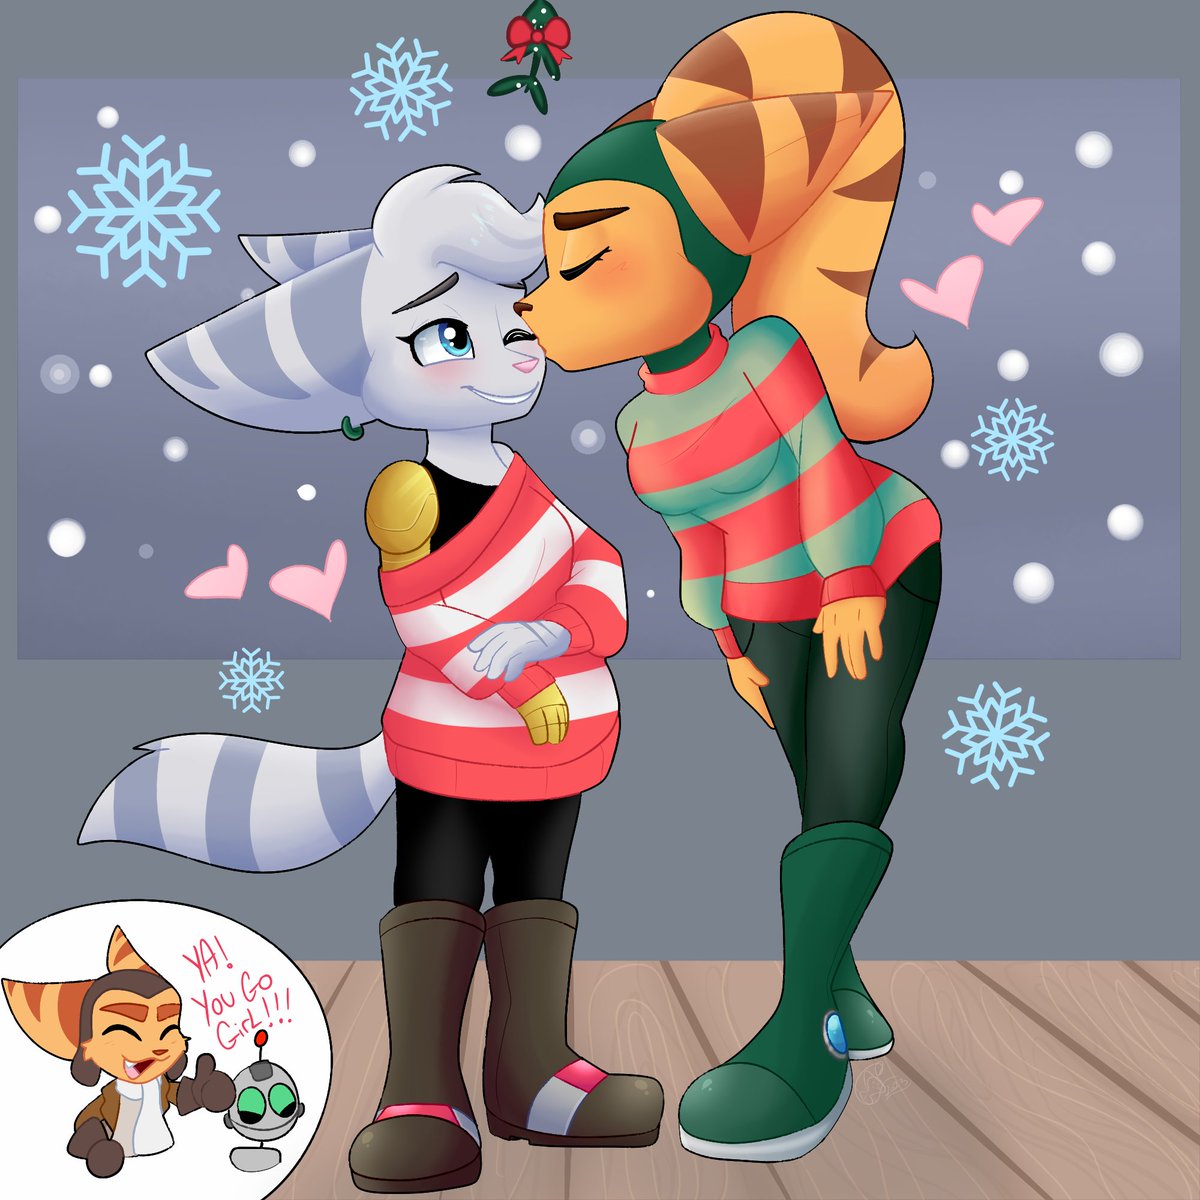 Christmas art i did of Rivet X Angela 💖✨
i really love how this came out ;;;

#RatchetAndClank #Lombax #Rivet #RatchetPS5 #Angelacross #RivetTheLombax